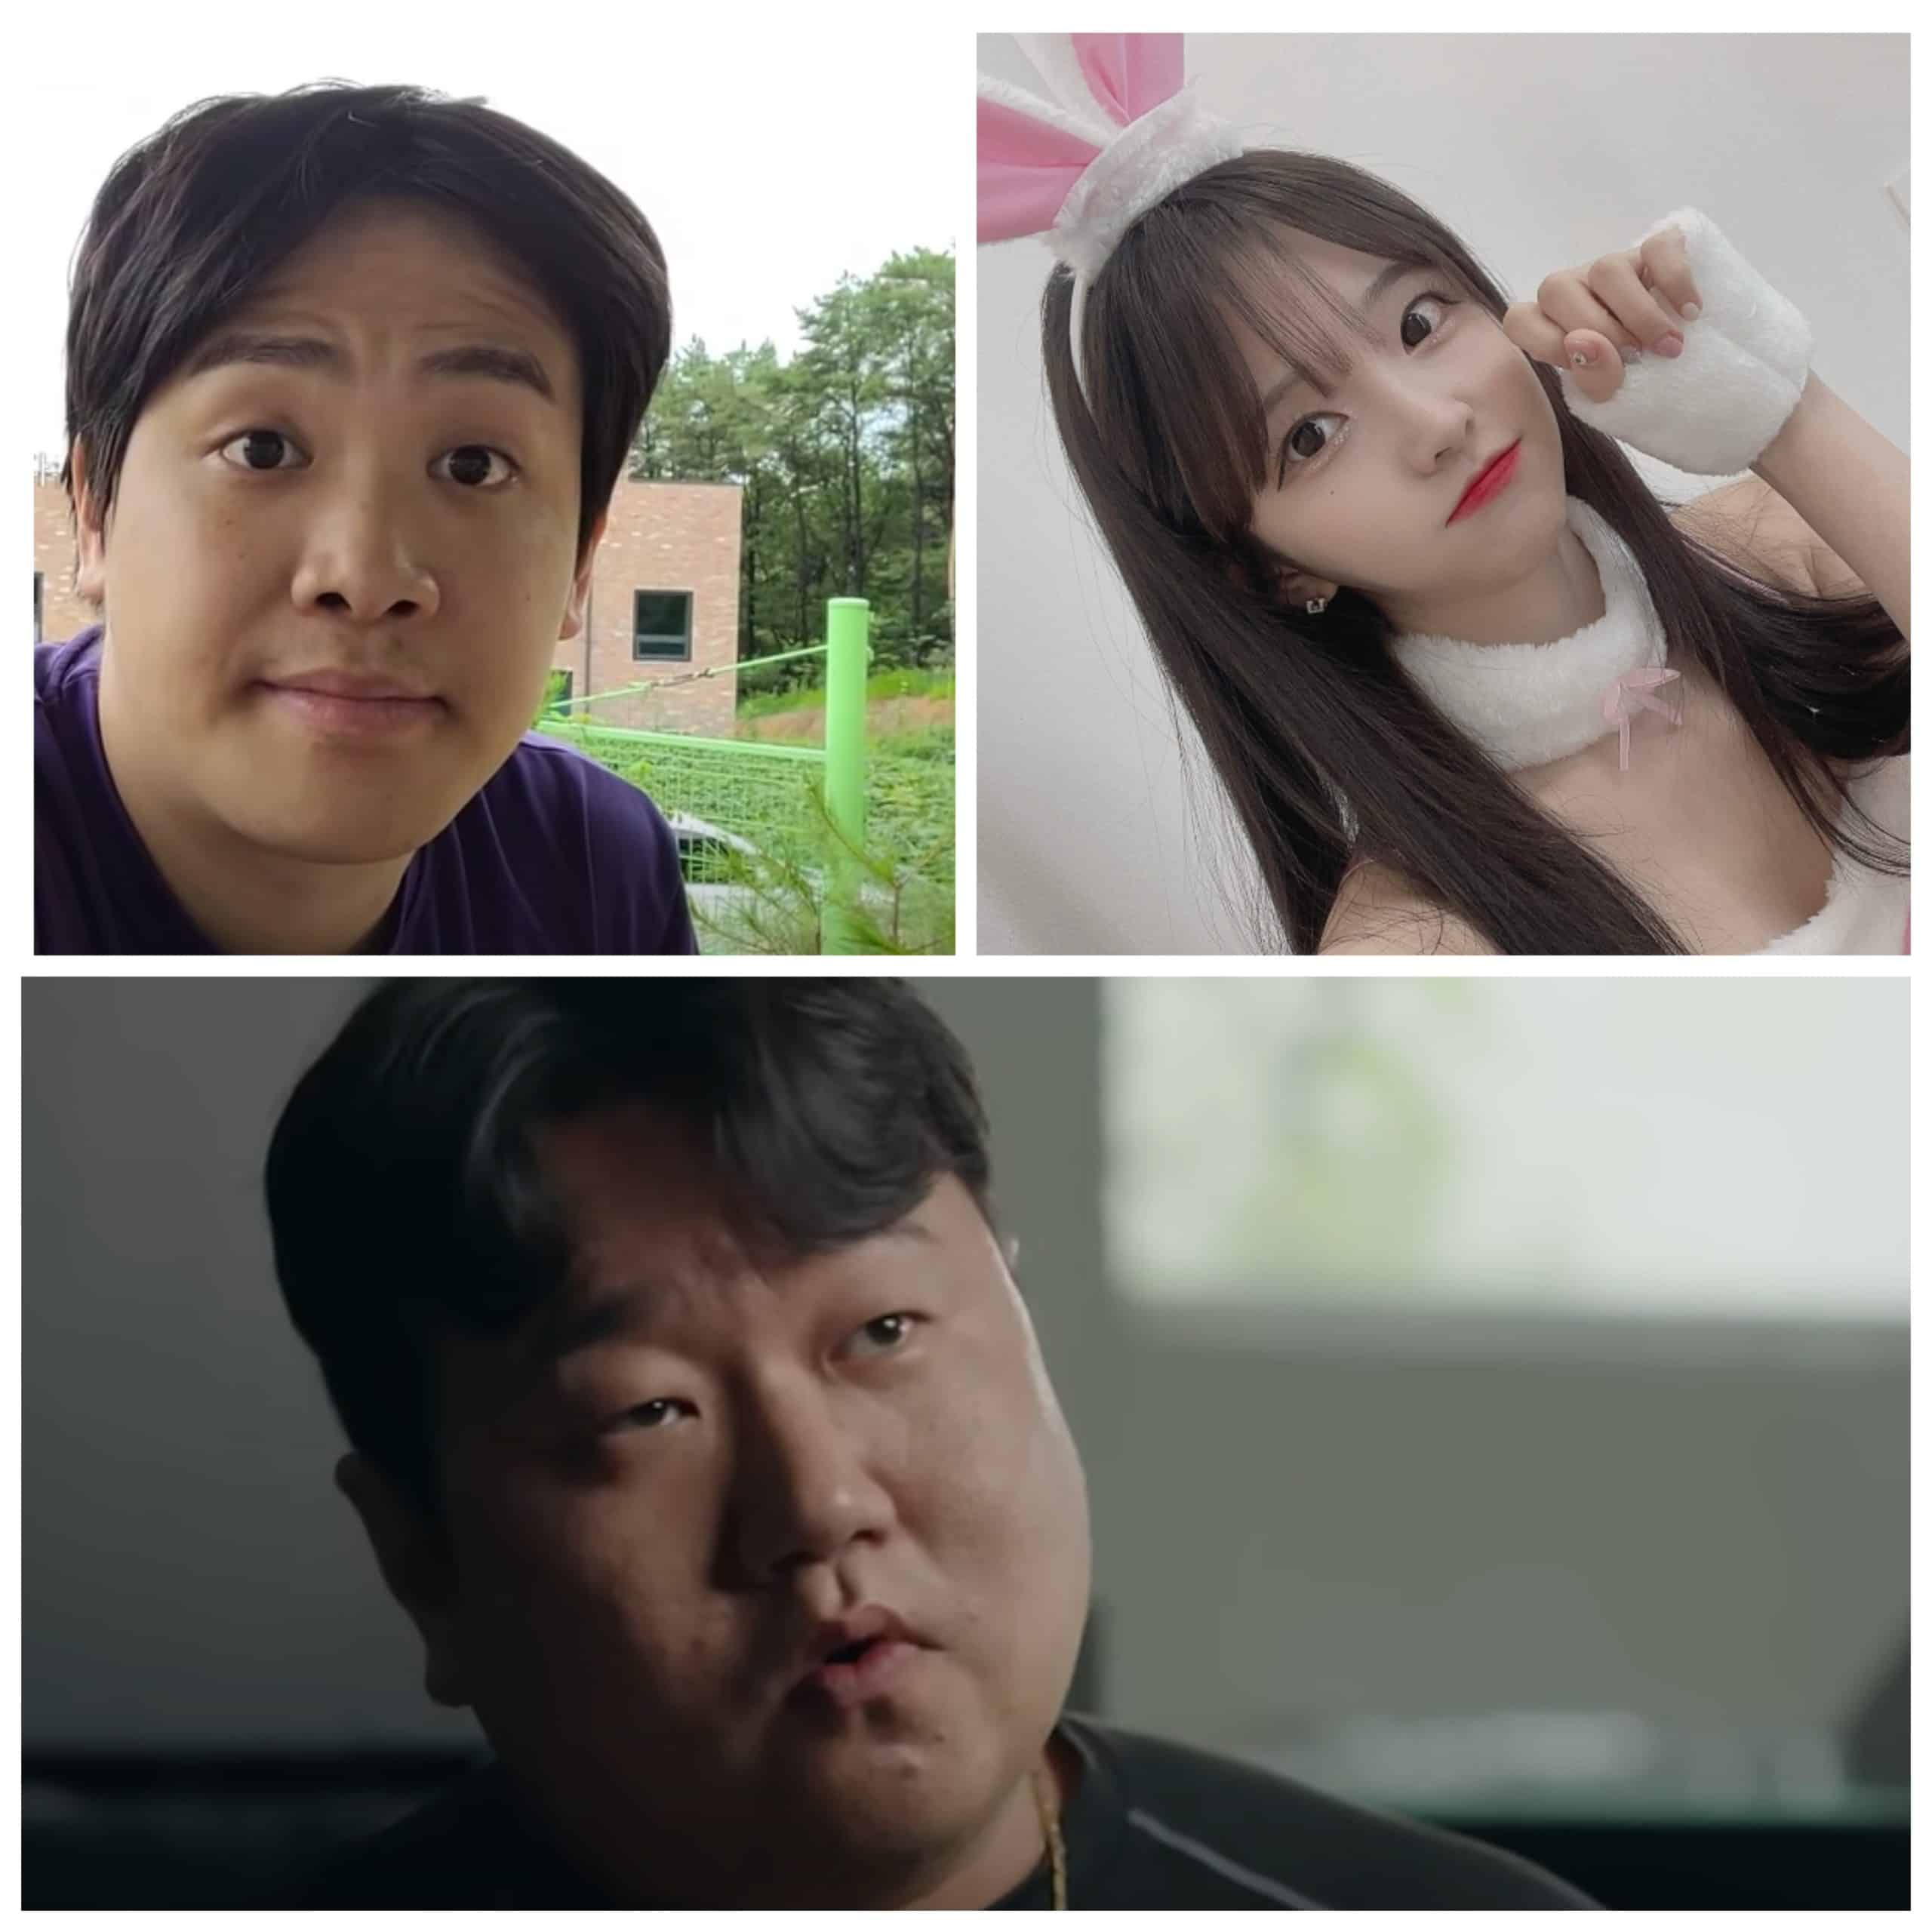 A montage of South Korean celebrities accused of having ties with Winnerz – the YouTuber Oking, model and social media star Park Min-jung, and the comedian Na Sun-uk.